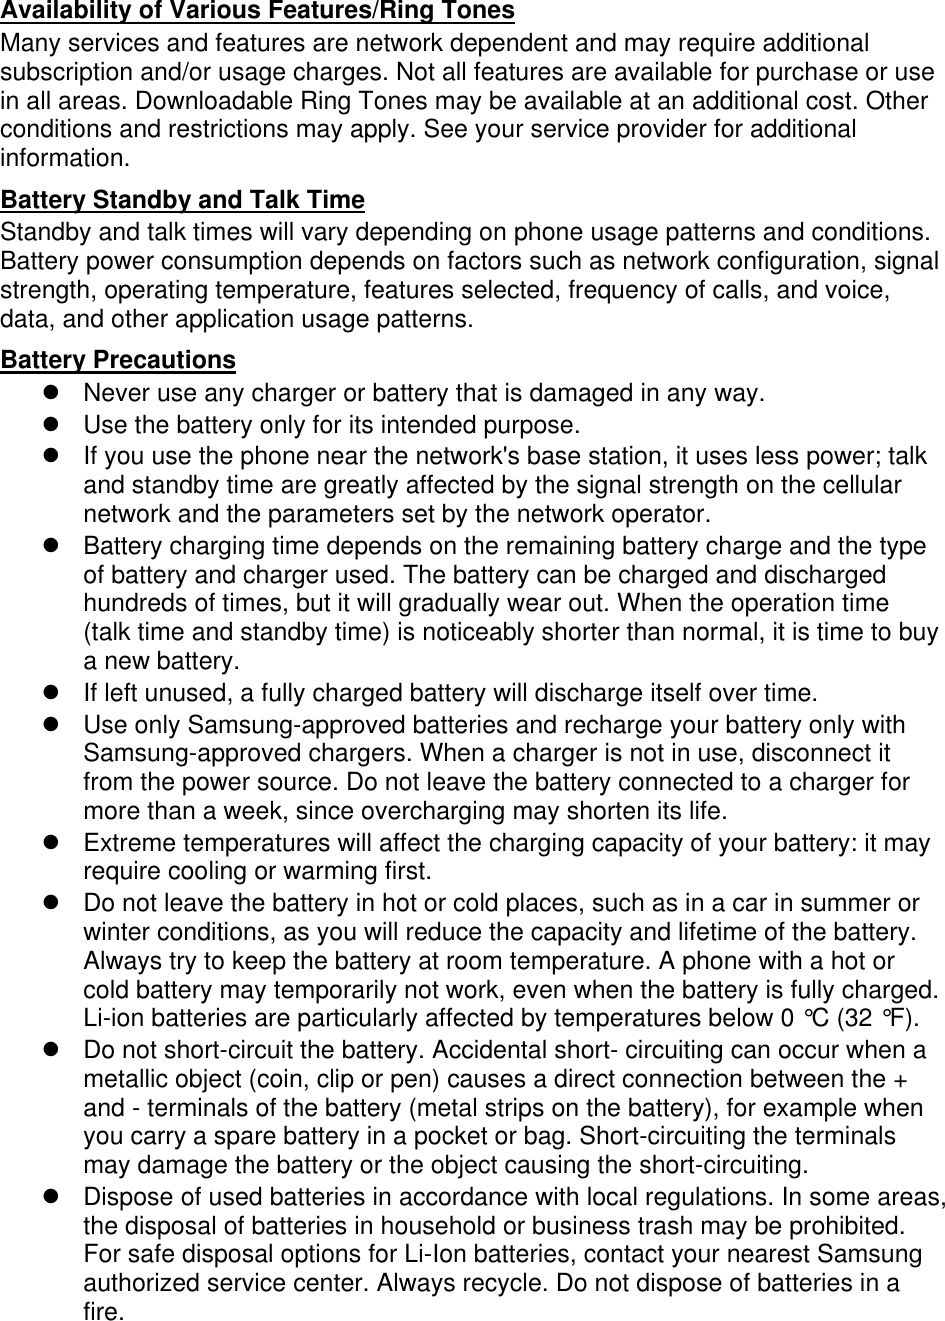 Availability of Various Features/Ring Tones Many services and features are network dependent and may require additional subscription and/or usage charges. Not all features are available for purchase or use in all areas. Downloadable Ring Tones may be available at an additional cost. Other conditions and restrictions may apply. See your service provider for additional information. Battery Standby and Talk Time Standby and talk times will vary depending on phone usage patterns and conditions. Battery power consumption depends on factors such as network configuration, signal strength, operating temperature, features selected, frequency of calls, and voice, data, and other application usage patterns.   Battery Precautions   Never use any charger or battery that is damaged in any way.   Use the battery only for its intended purpose.   If you use the phone near the network&apos;s base station, it uses less power; talk and standby time are greatly affected by the signal strength on the cellular network and the parameters set by the network operator.   Battery charging time depends on the remaining battery charge and the type of battery and charger used. The battery can be charged and discharged hundreds of times, but it will gradually wear out. When the operation time (talk time and standby time) is noticeably shorter than normal, it is time to buy a new battery.   If left unused, a fully charged battery will discharge itself over time.   Use only Samsung-approved batteries and recharge your battery only with Samsung-approved chargers. When a charger is not in use, disconnect it from the power source. Do not leave the battery connected to a charger for more than a week, since overcharging may shorten its life.   Extreme temperatures will affect the charging capacity of your battery: it may require cooling or warming first.   Do not leave the battery in hot or cold places, such as in a car in summer or winter conditions, as you will reduce the capacity and lifetime of the battery. Always try to keep the battery at room temperature. A phone with a hot or cold battery may temporarily not work, even when the battery is fully charged. Li-ion batteries are particularly affected by temperatures below 0 °C (32 °F).   Do not short-circuit the battery. Accidental short- circuiting can occur when a metallic object (coin, clip or pen) causes a direct connection between the + and - terminals of the battery (metal strips on the battery), for example when you carry a spare battery in a pocket or bag. Short-circuiting the terminals may damage the battery or the object causing the short-circuiting.   Dispose of used batteries in accordance with local regulations. In some areas, the disposal of batteries in household or business trash may be prohibited. For safe disposal options for Li-Ion batteries, contact your nearest Samsung authorized service center. Always recycle. Do not dispose of batteries in a fire. 